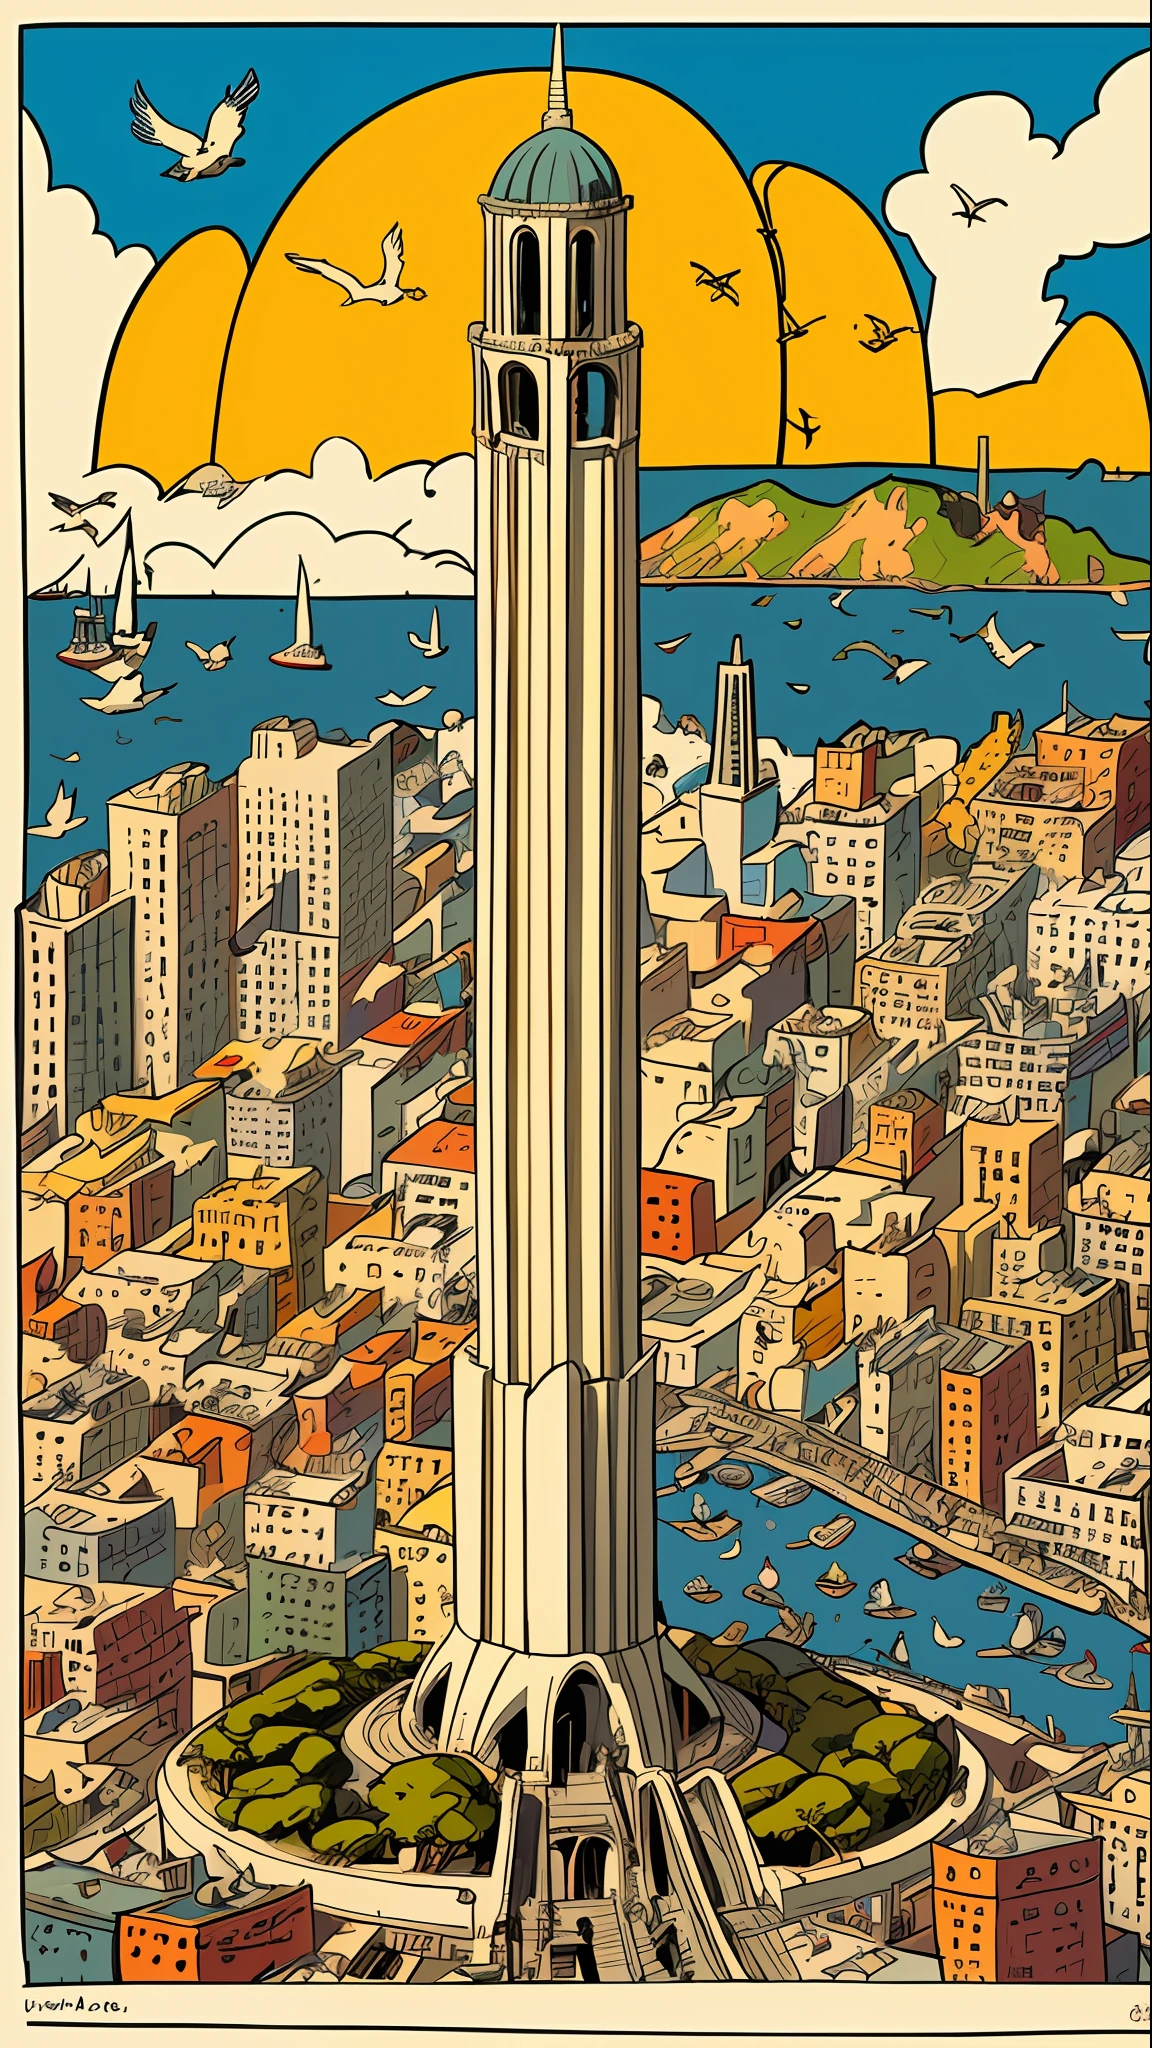 Chaotic maximalist San Francisco coit tower, bird's eye view and flying gastlis, illustrated by Herg, tin tin, pen-and-ink comic book style